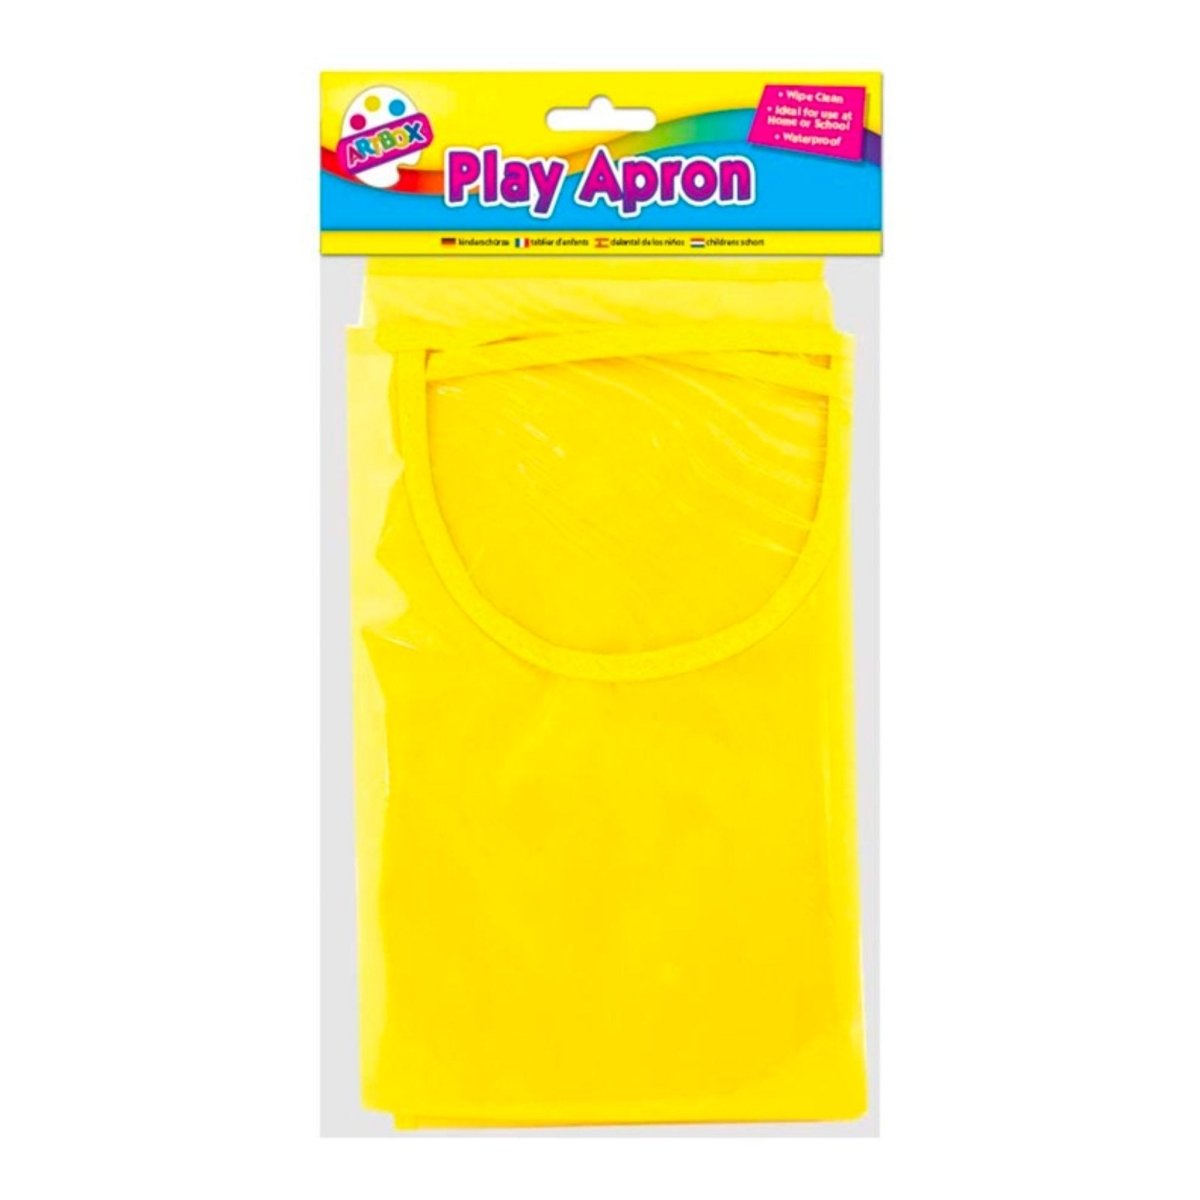 Play Apron - Kids Party Craft